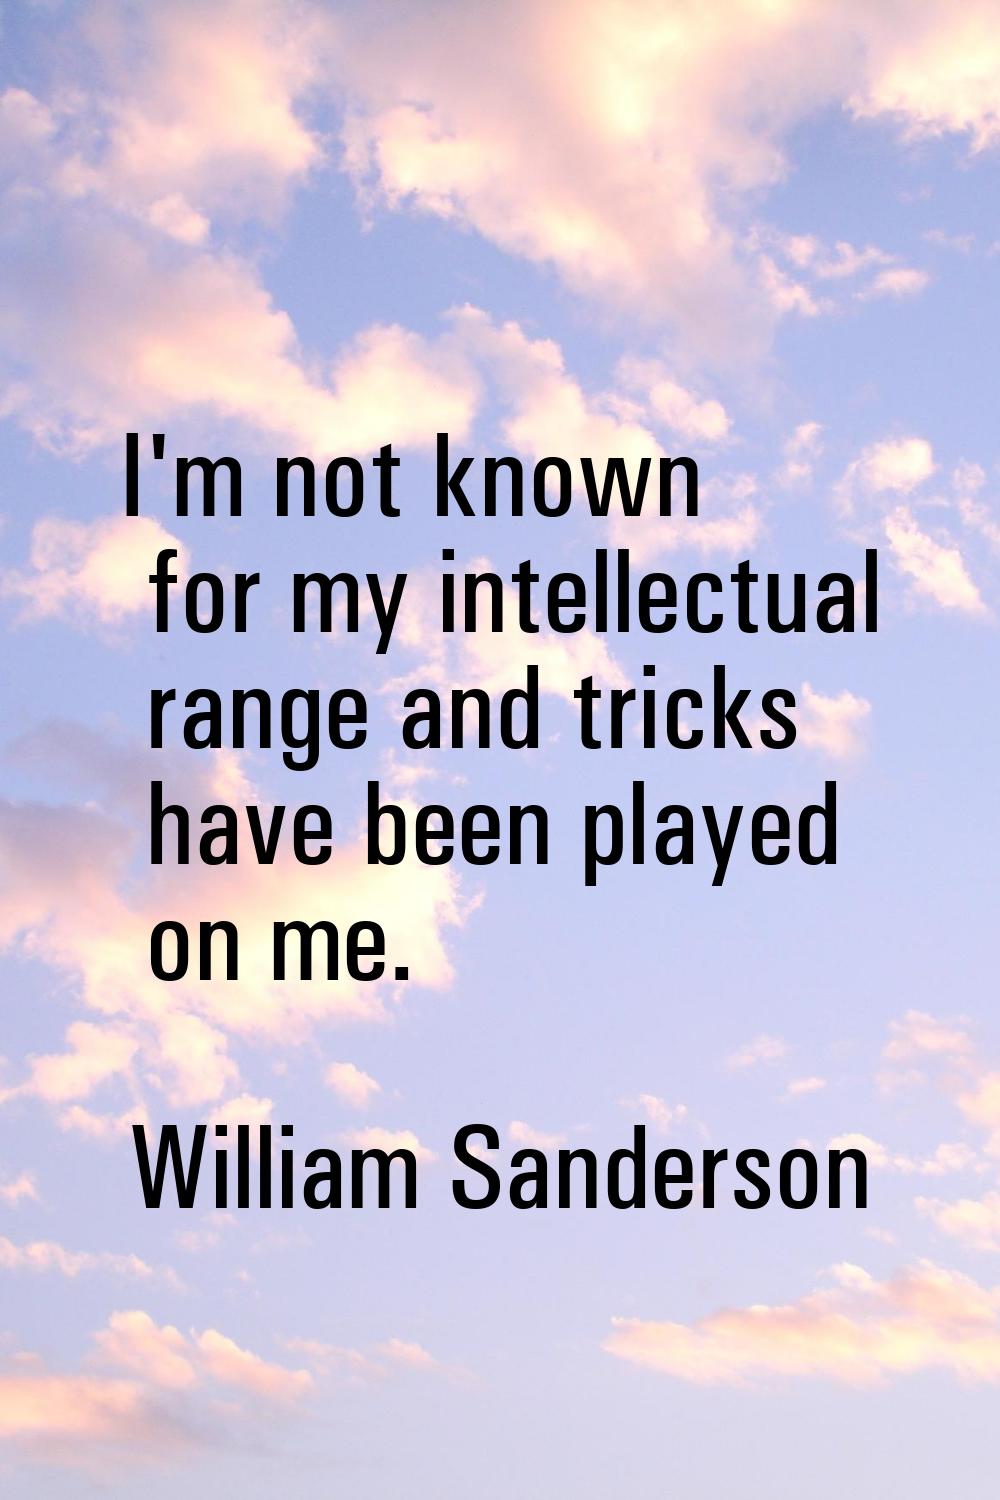 I'm not known for my intellectual range and tricks have been played on me.